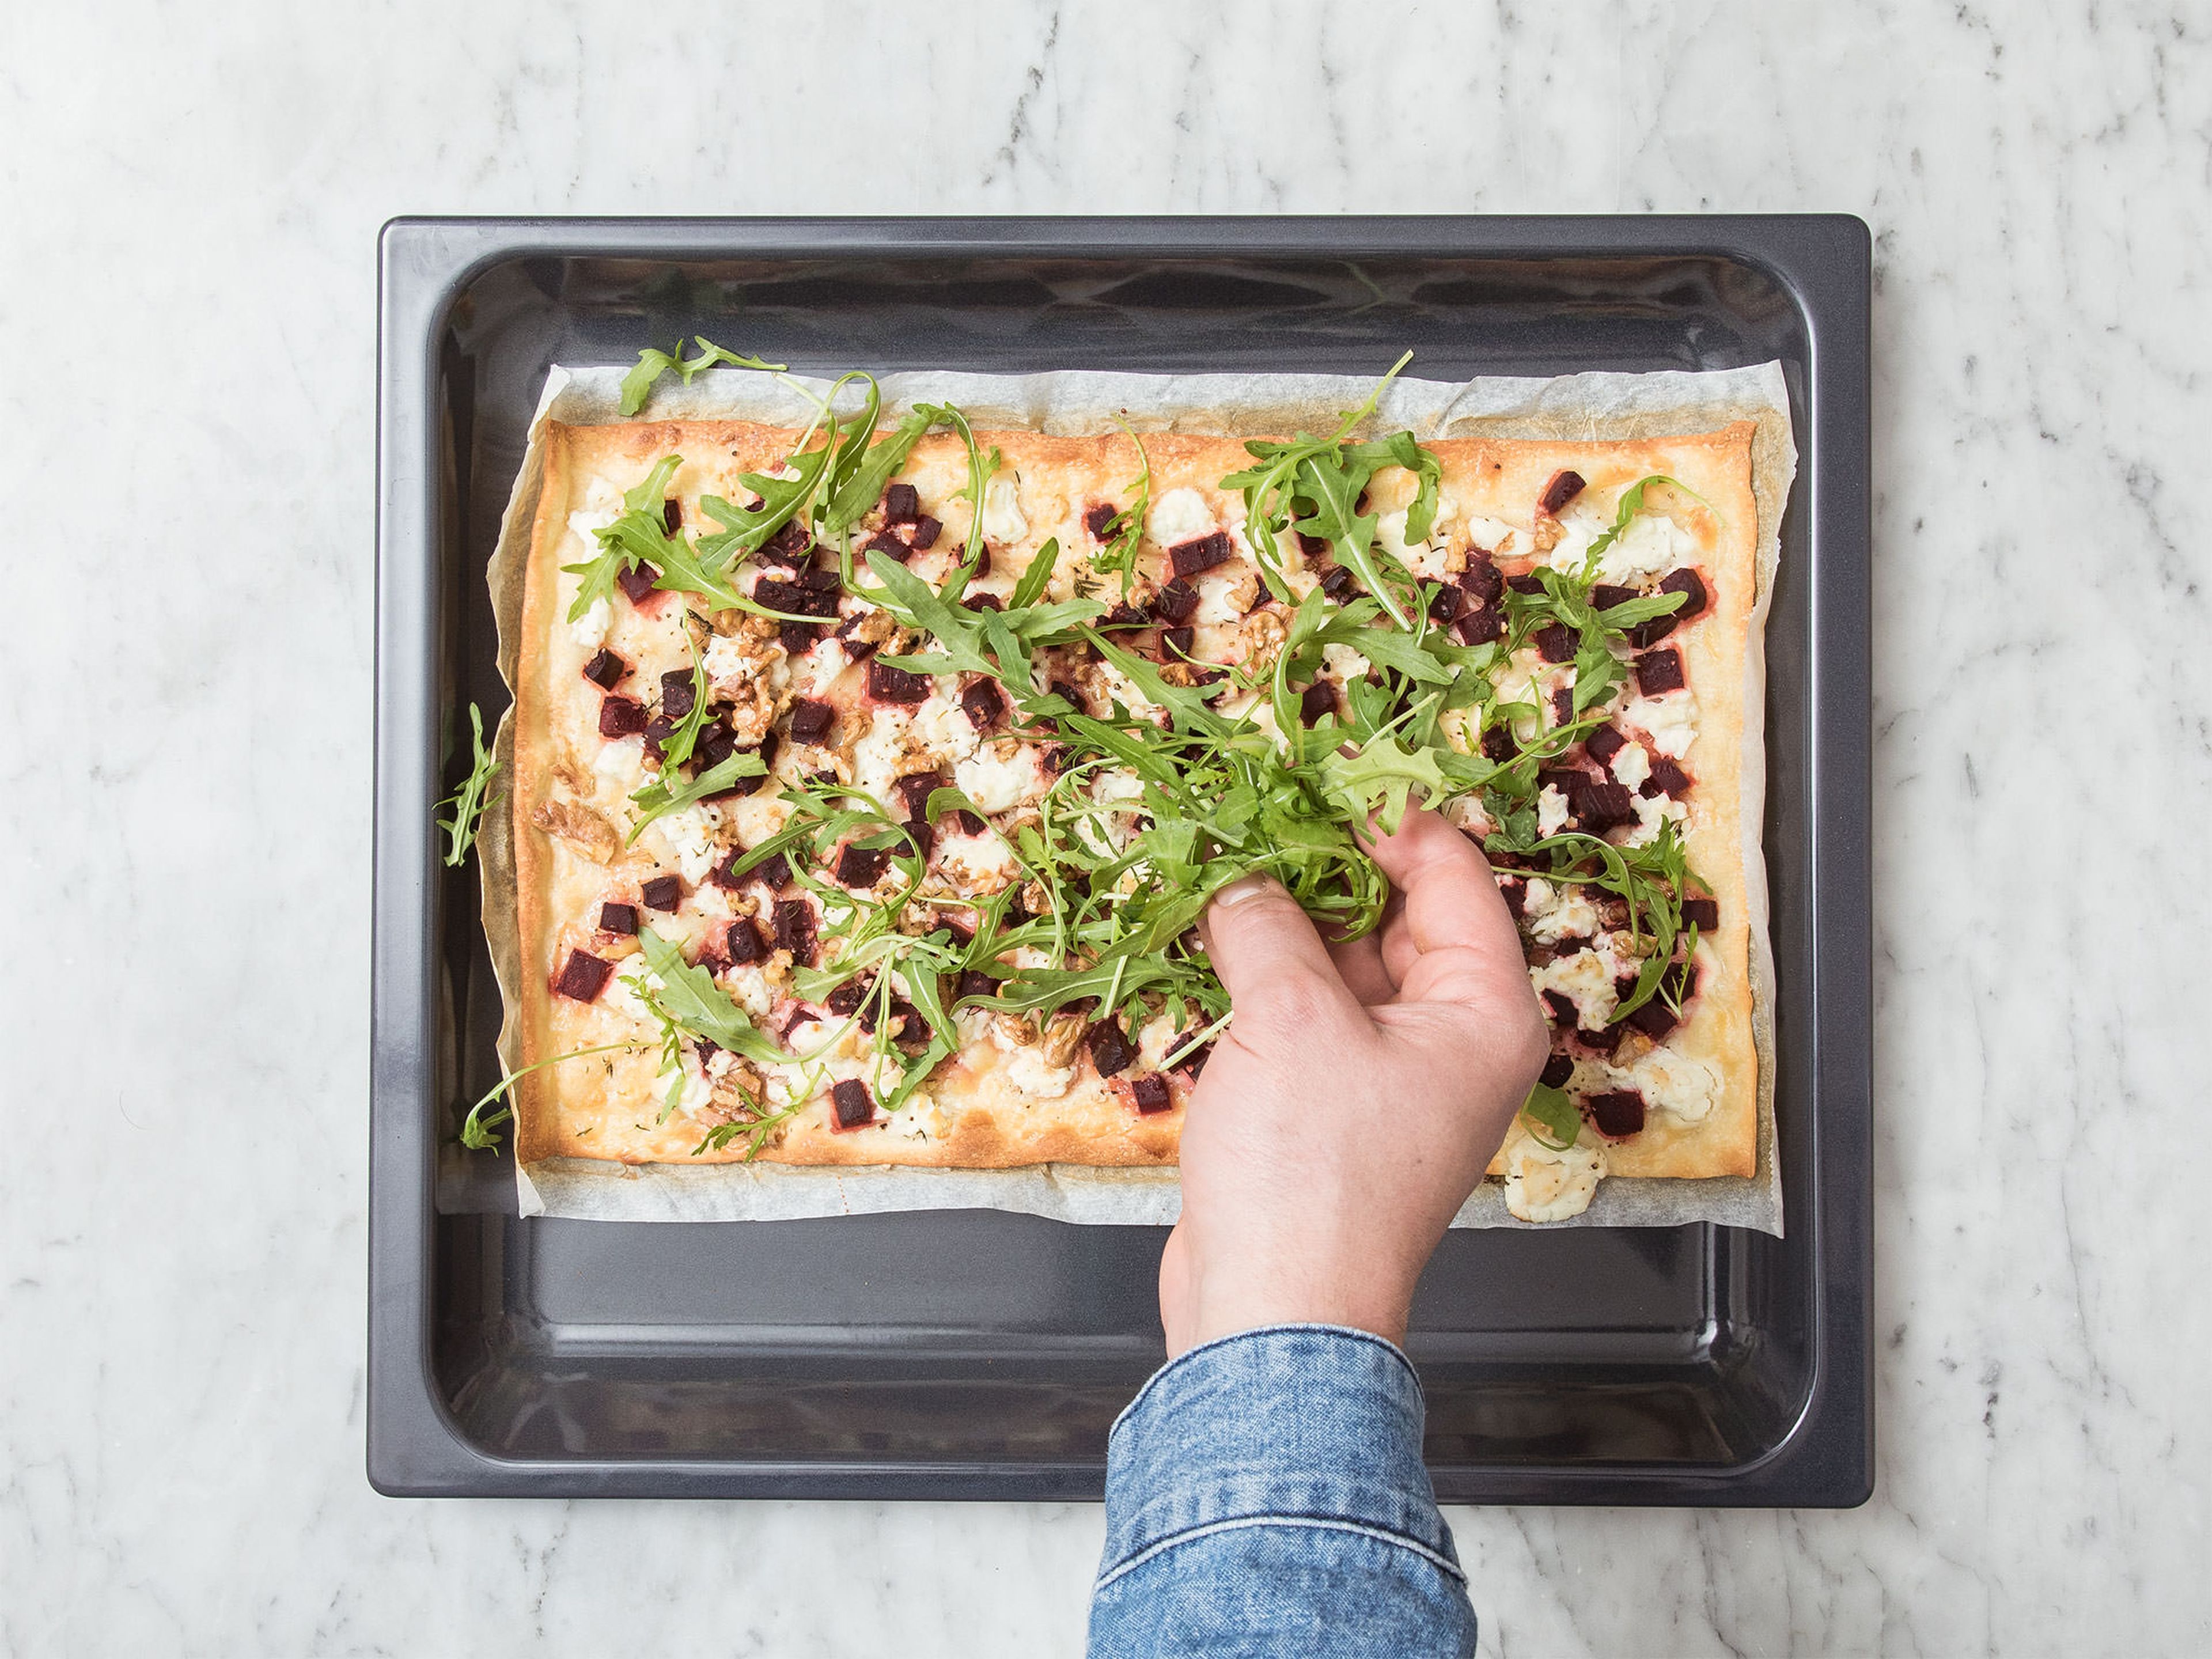 Bake in the oven at 200°C/390°F for approx. 15 – 20 min., or until the crust is golden and the cheese starts to melt. Garnish with fresh arugula and enjoy!